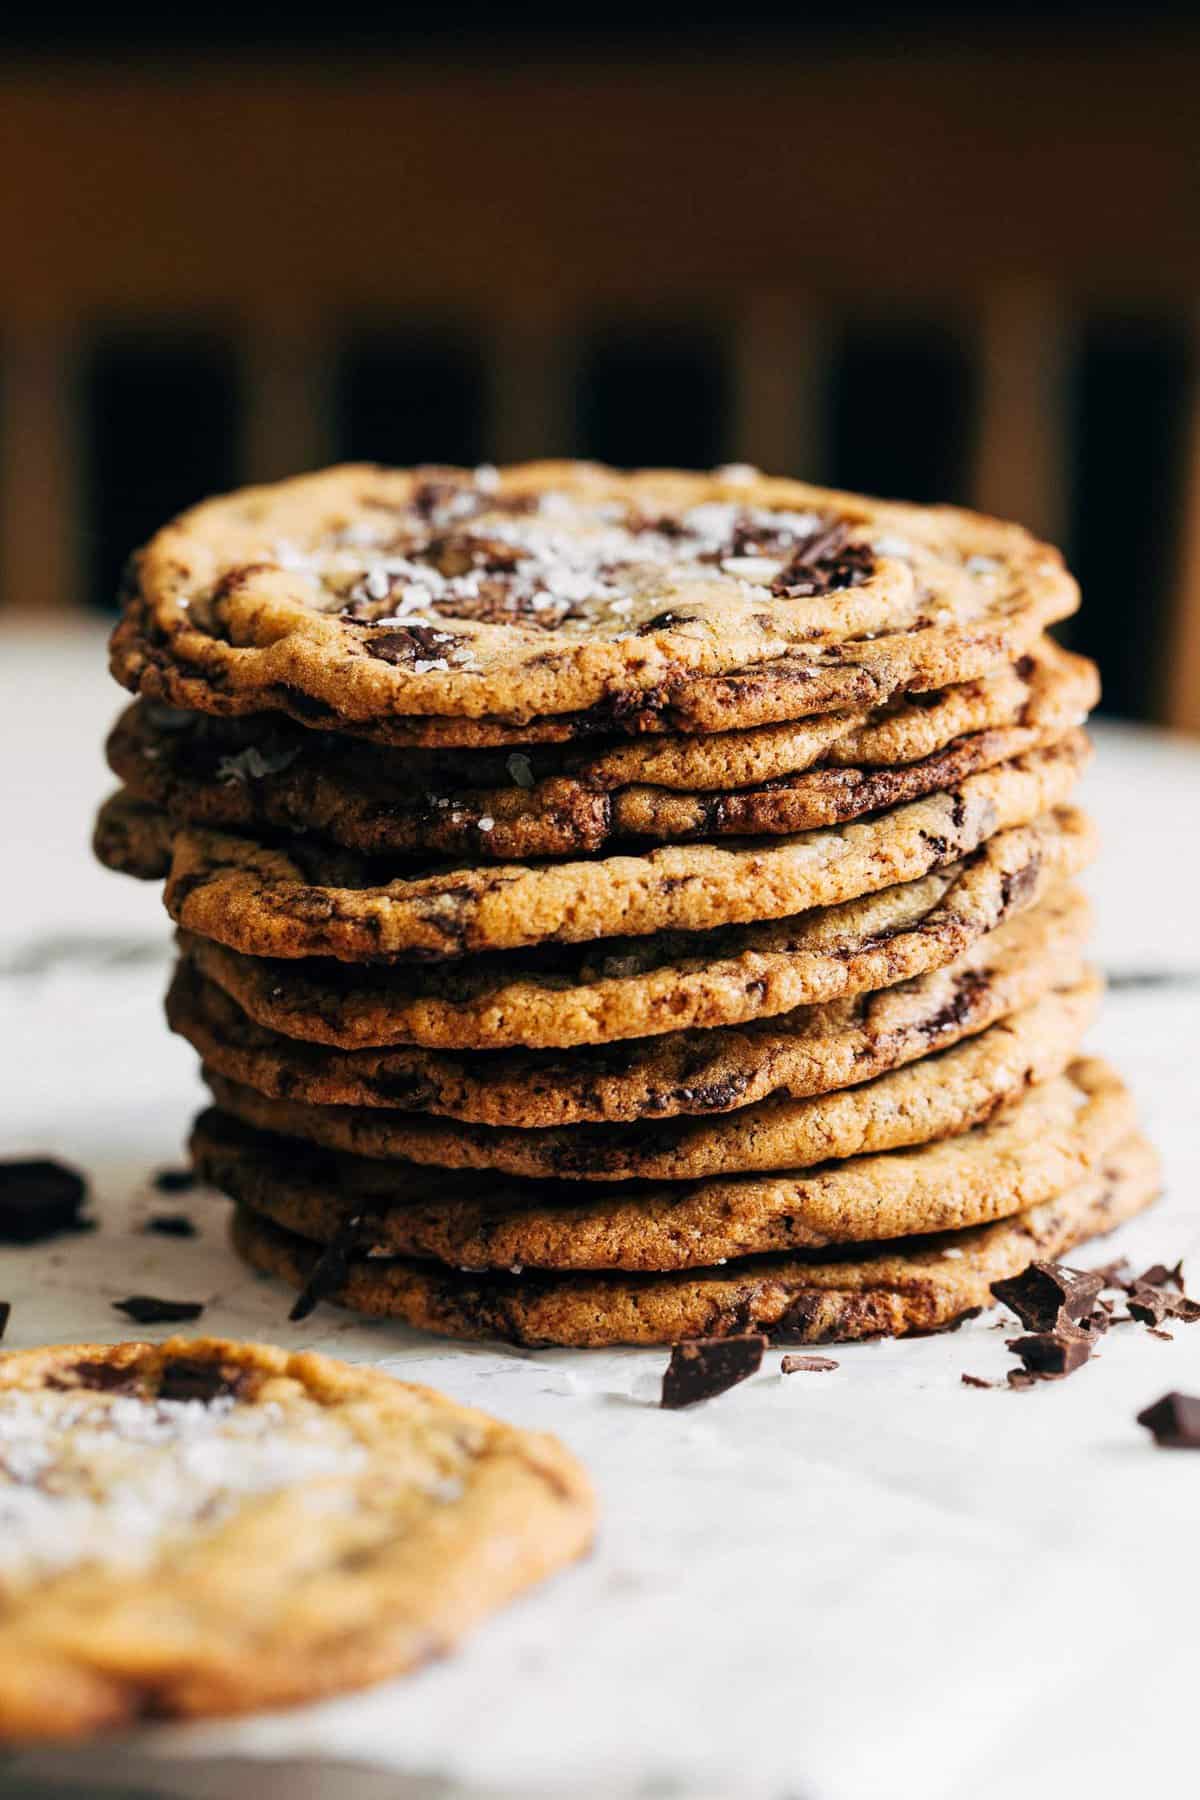 https://butternutbakeryblog.com/wp-content/uploads/2022/05/crispy-chocolate-chip-cookies-stacked.jpg